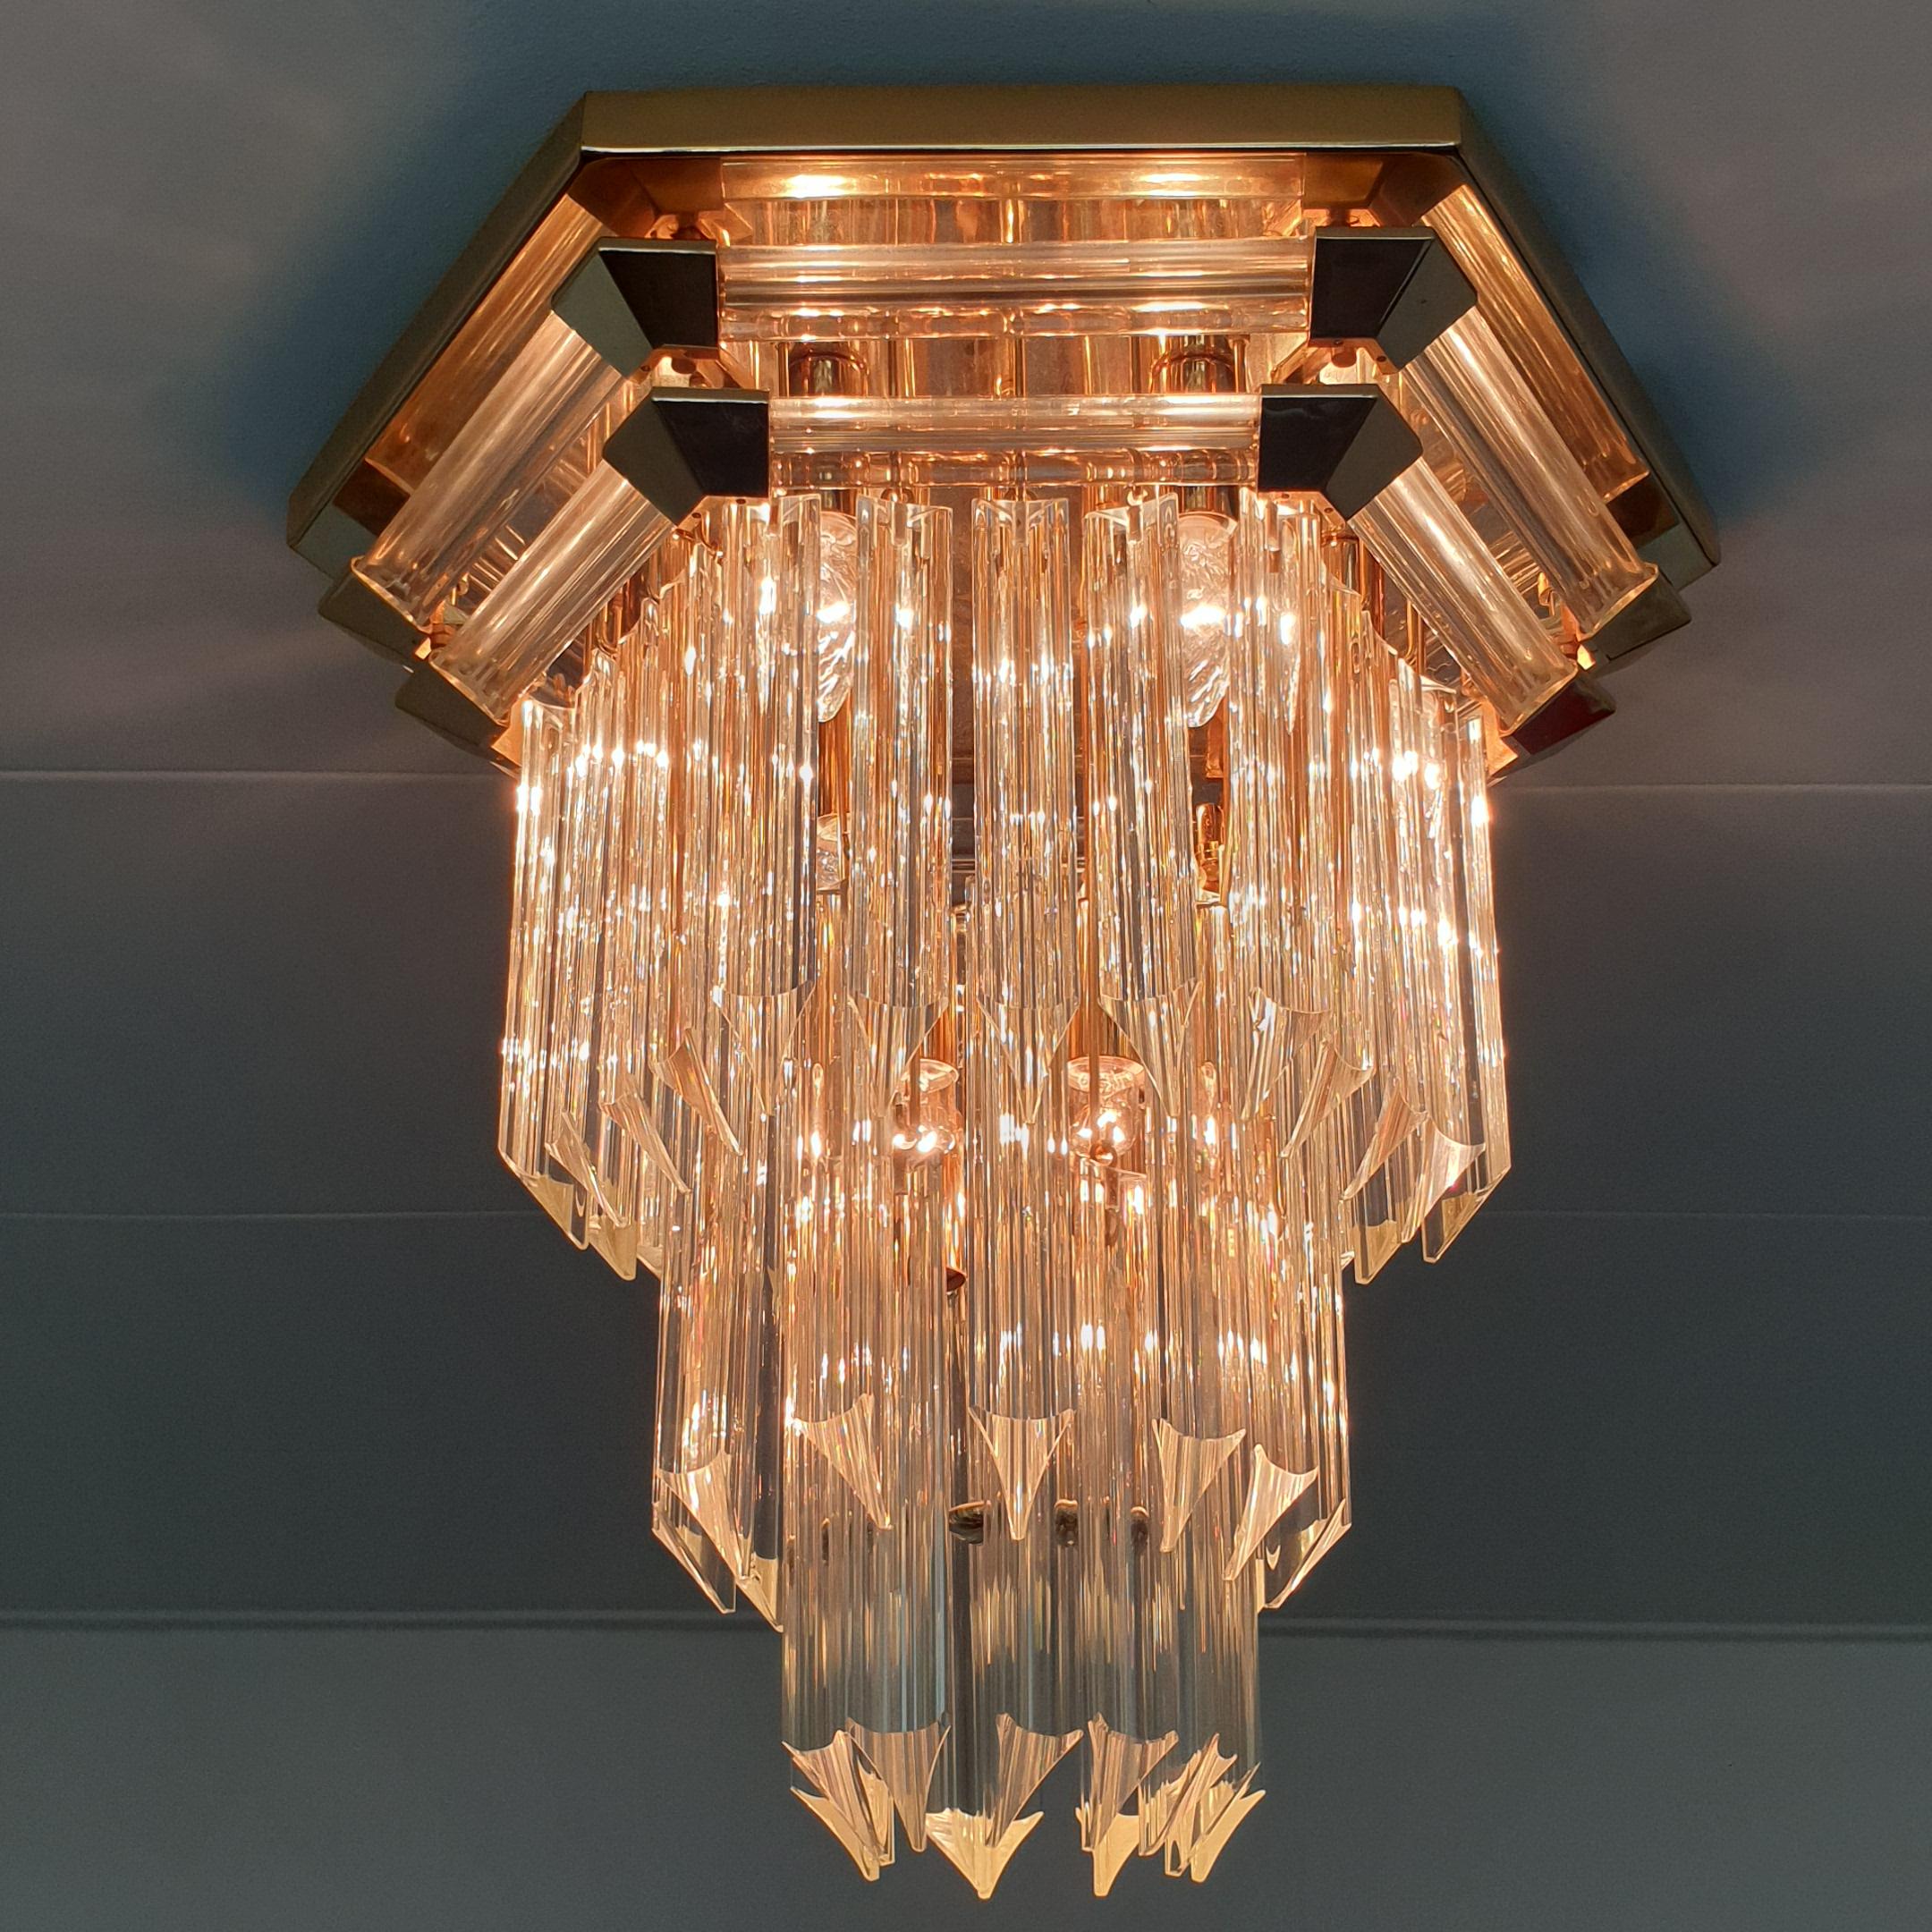 Gold-plated and crystal glass ceiling lamp by Bakalowits & Söhne.
Made in Austria.
With 48 crystal glass cones and 14 little E14 fittings.

The Bakalowits company was founded in 1845 by Elias Bakalowits and they create stunning lights.